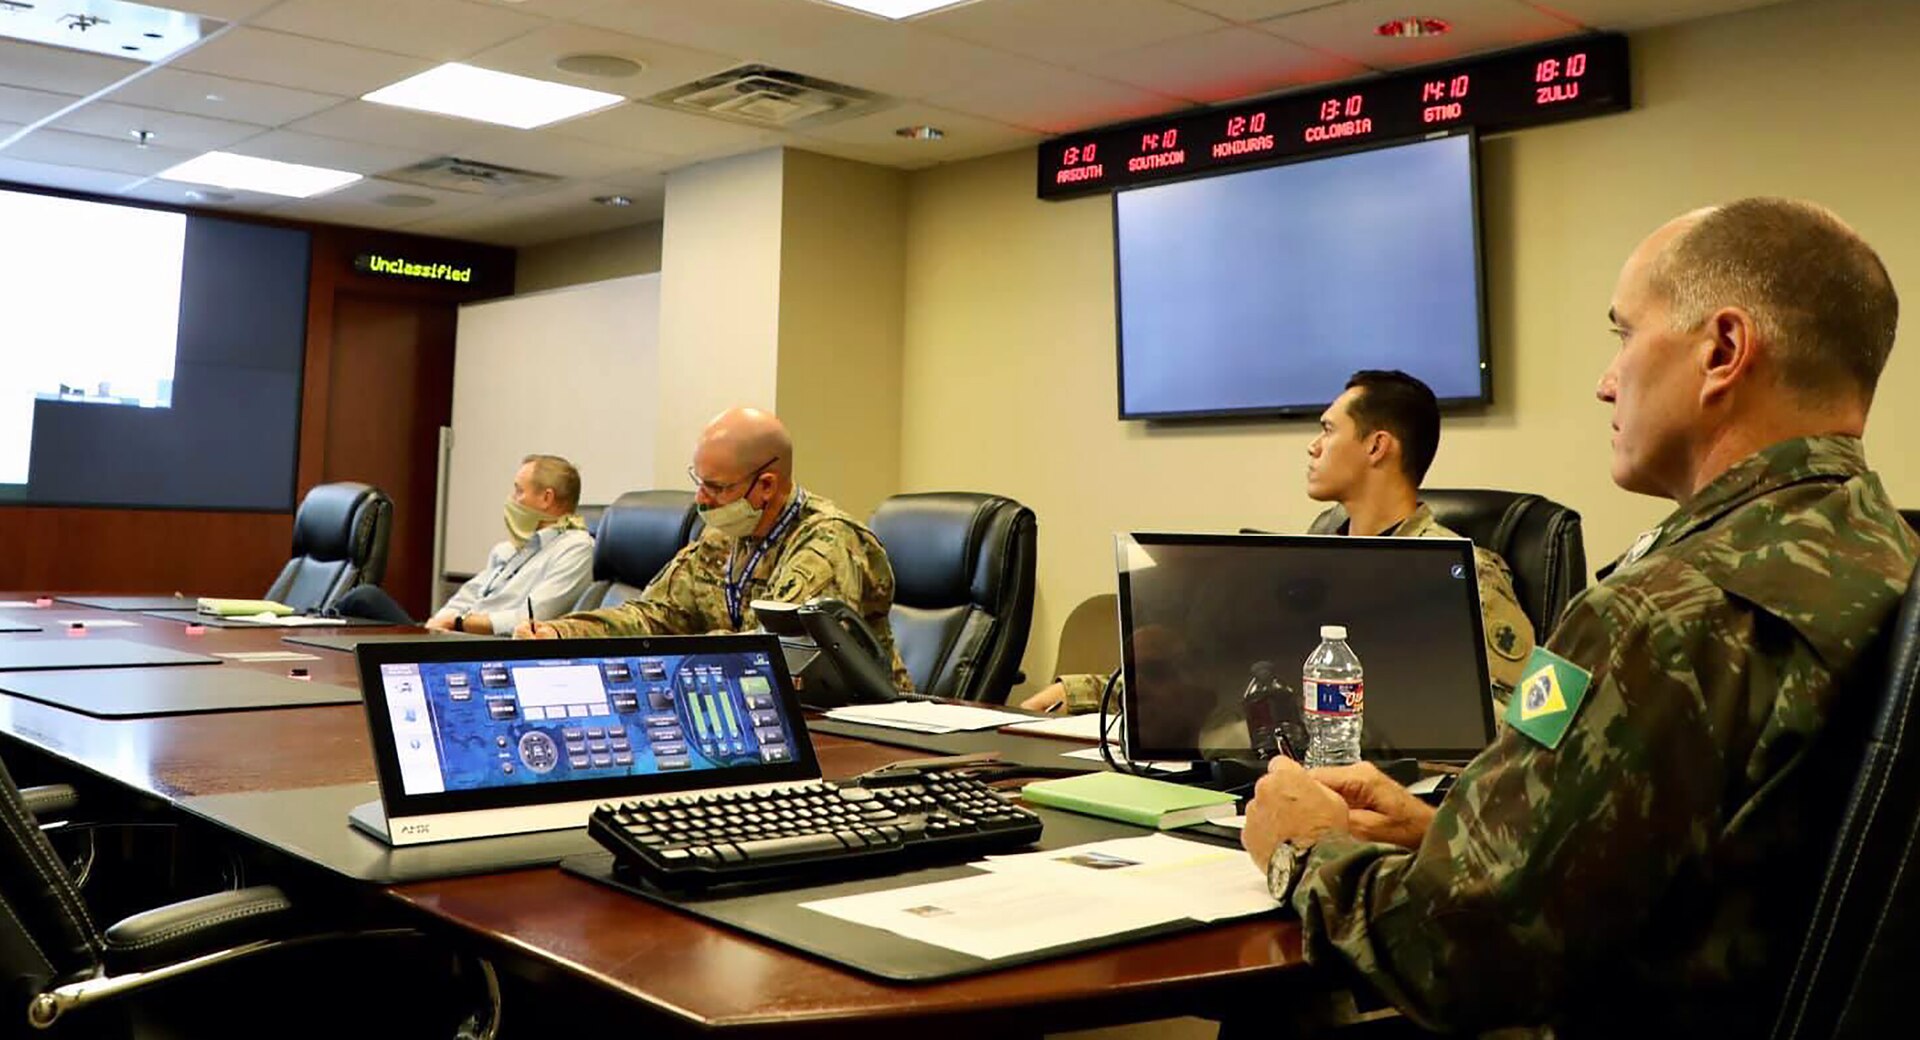 General-de-Brigada Alcides V. Faria, Jr., deputy commanding general of interoperability, U.S. Army South, participated in a virtual key leader engagement with personnel from the Jamaica Defence Force, Caribbean Disaster Emergency Management Agency (West) and the Office of Disaster Preparedness Management Aug. 17 to discuss humanitarian assistance and disaster relief preparations in Jamaica and assess capabilities in the event of a natural disaster.